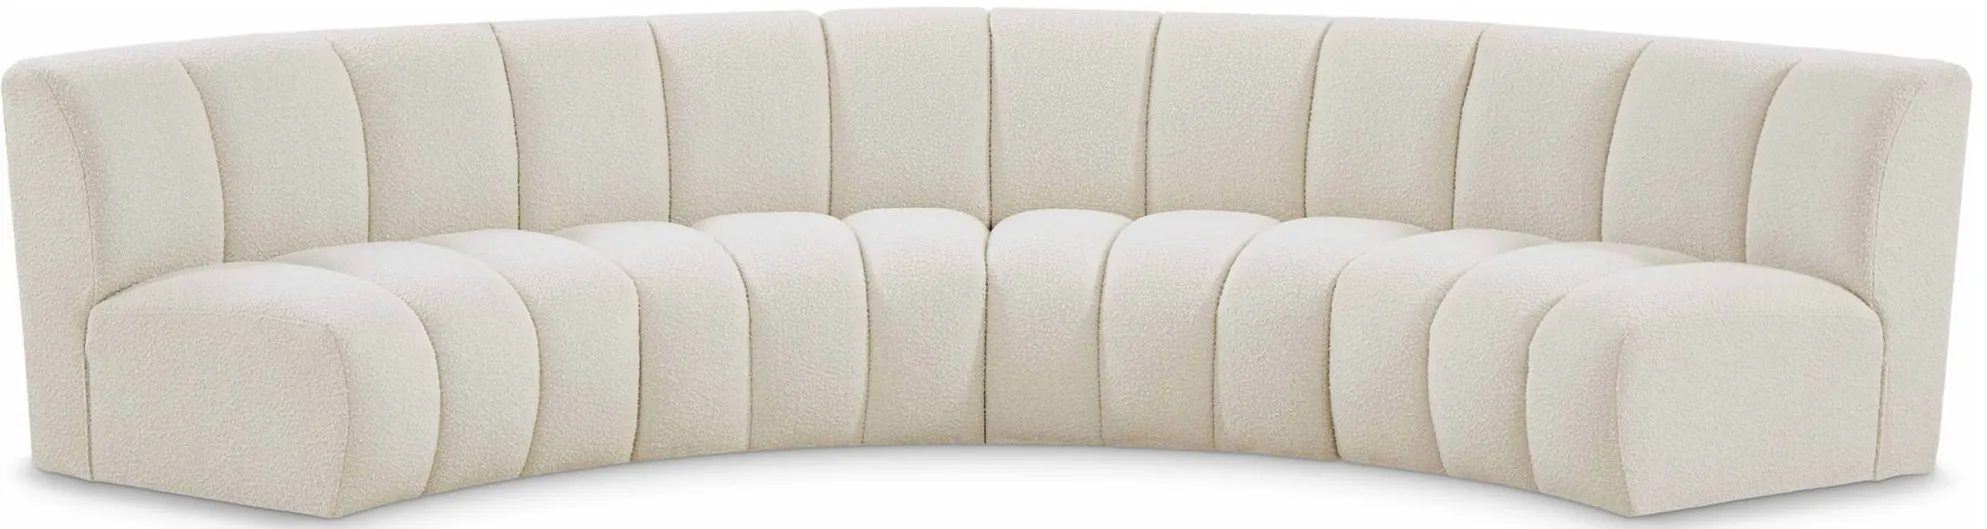 Infinity 4pc. Modular Sectional in Cream by Meridian Furniture